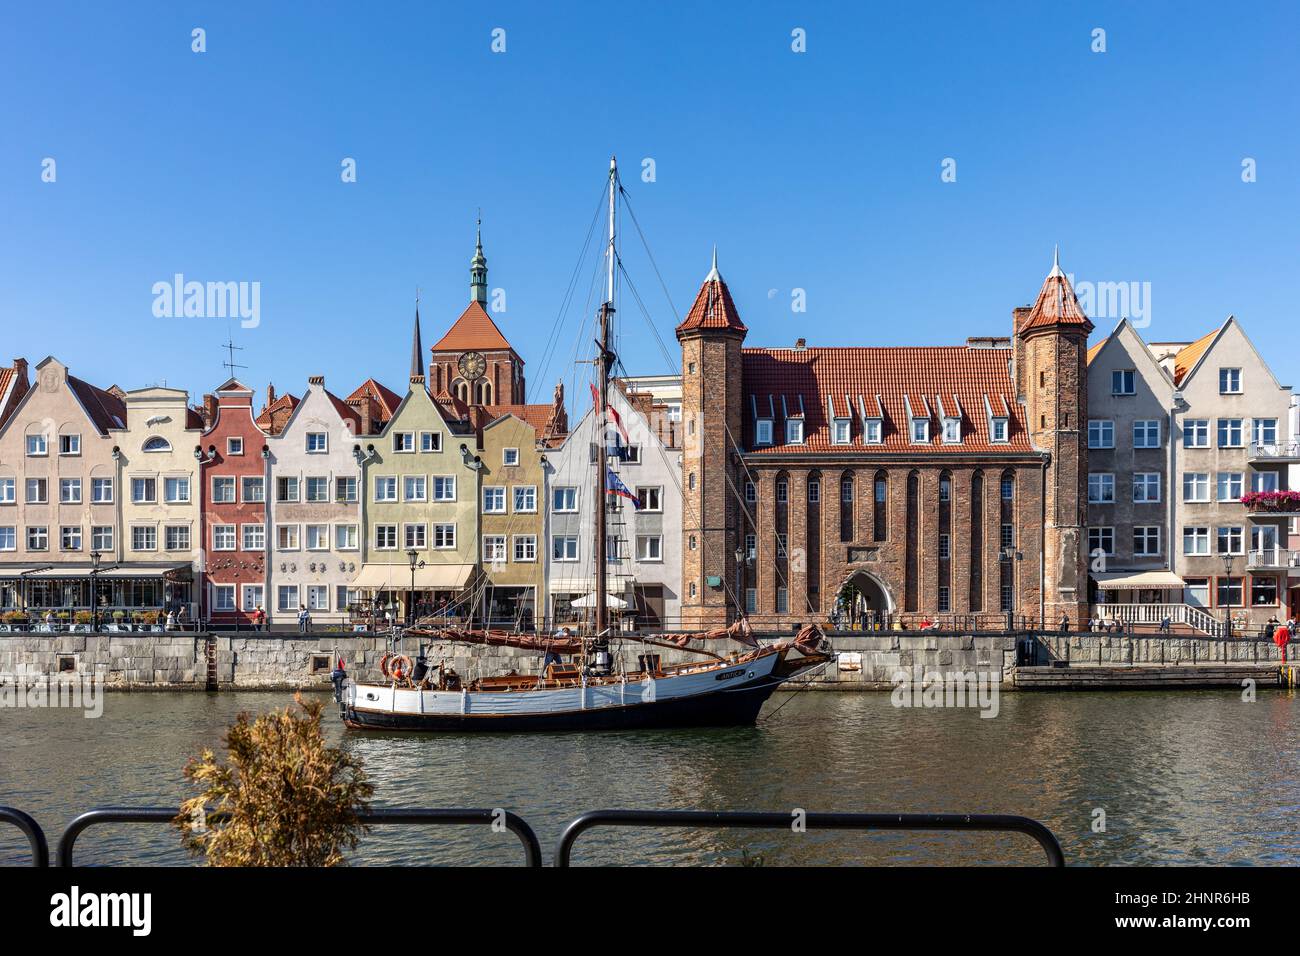 Old town of Gdansk with the Mariacka Gate and a promenade along the riverbank of Motlawa River Stock Photo